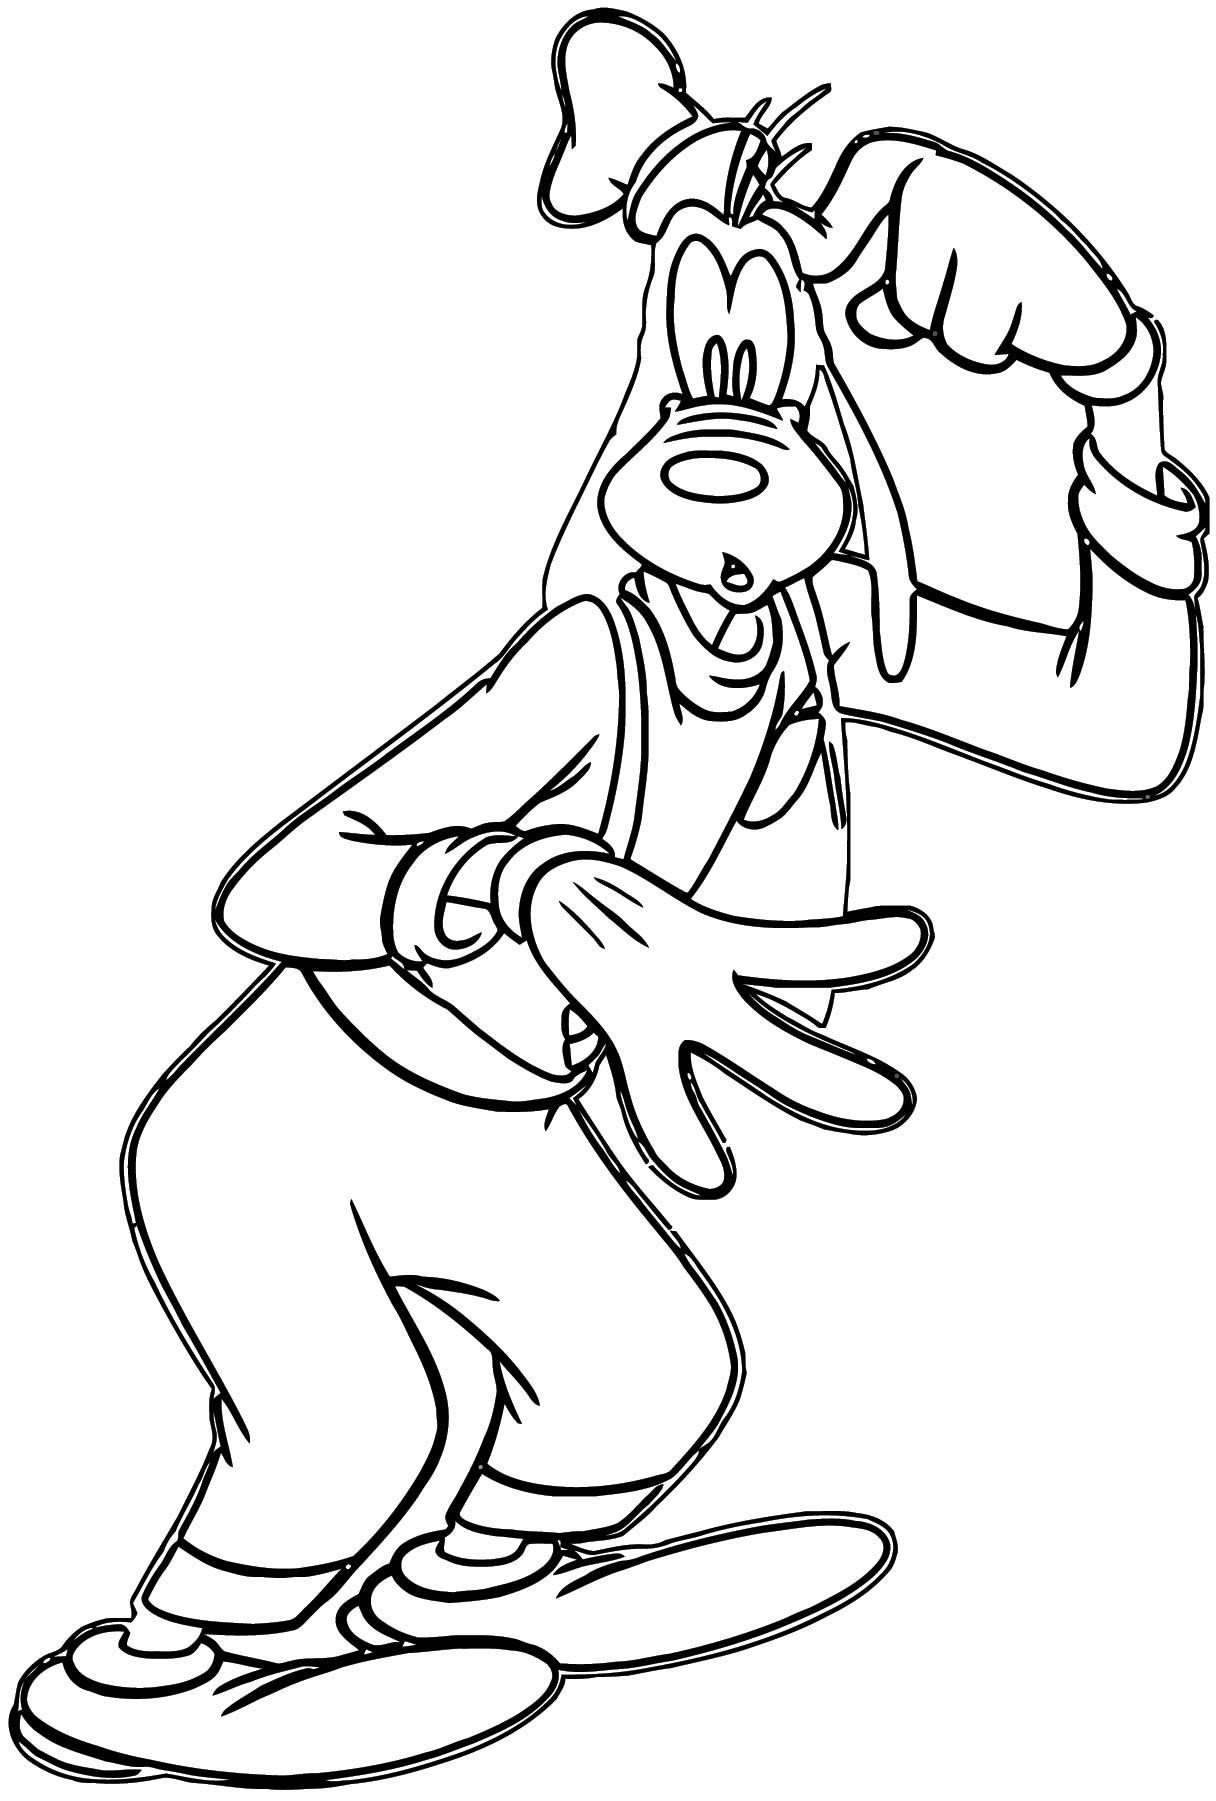 Goofy Coloring Pages 30 | Wecoloringpage.com